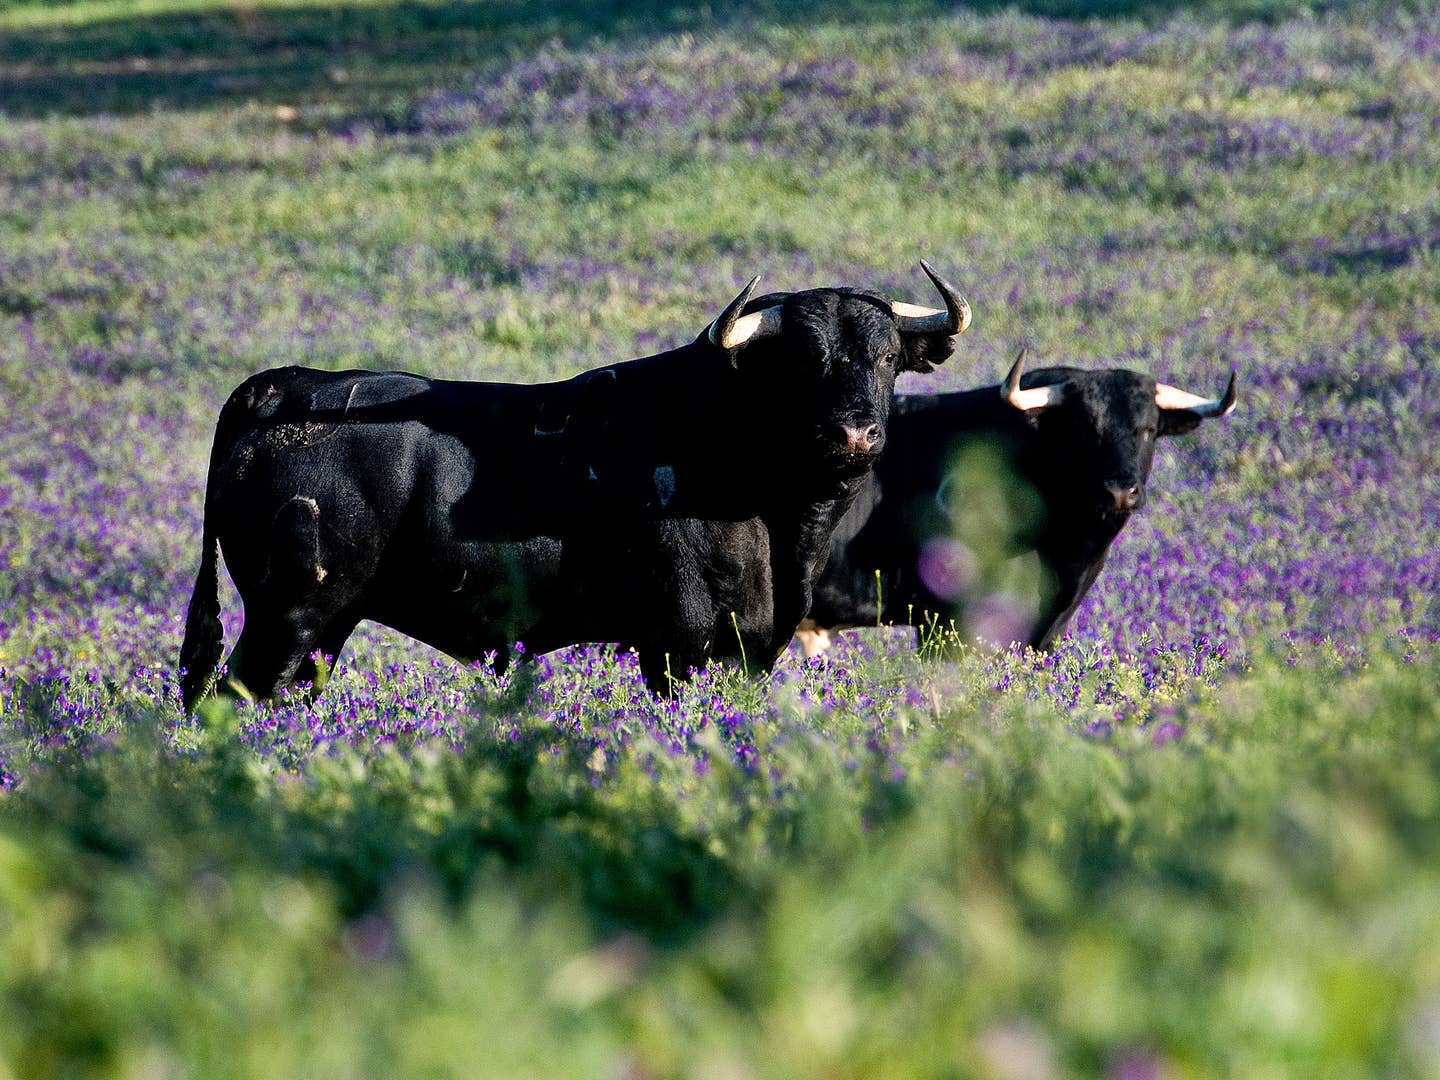 Are Fighting Bulls Spain’s Next Great Delicacy?